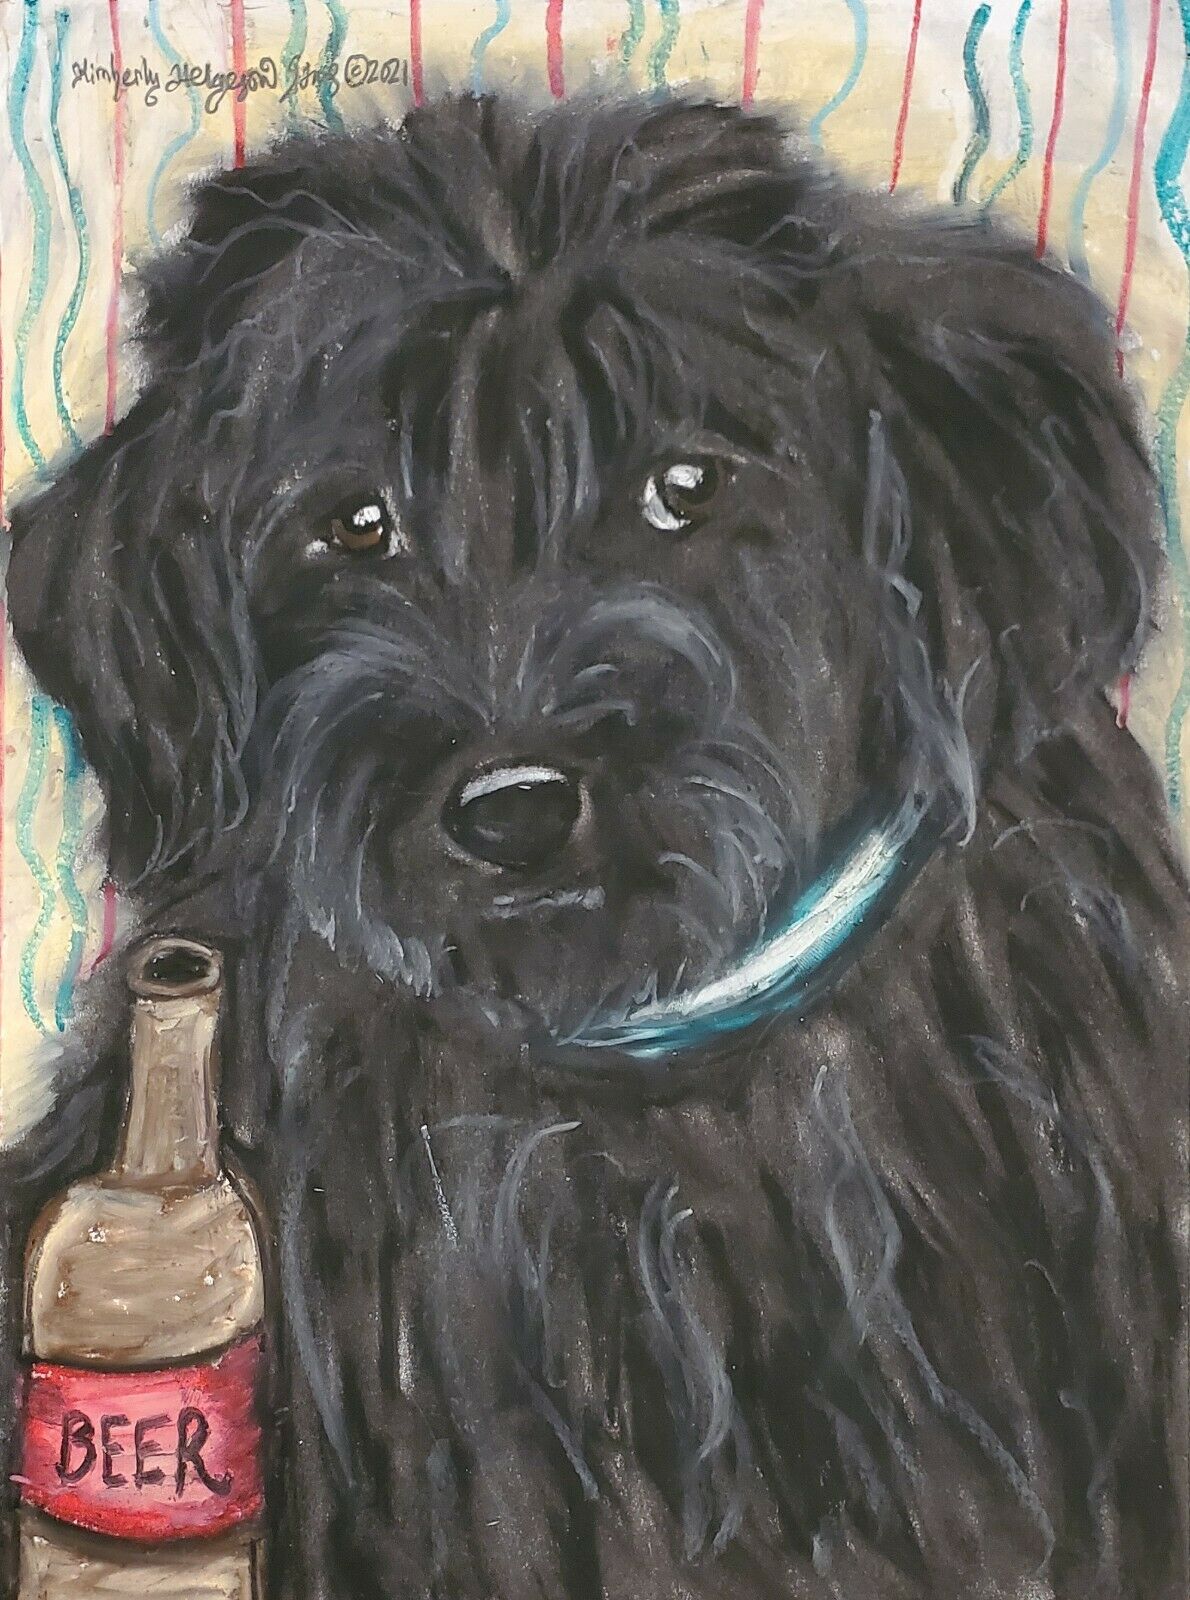 8x10 Black Labradoodle With A Beer Dog Art Print Of Painting Artwork By Ksams